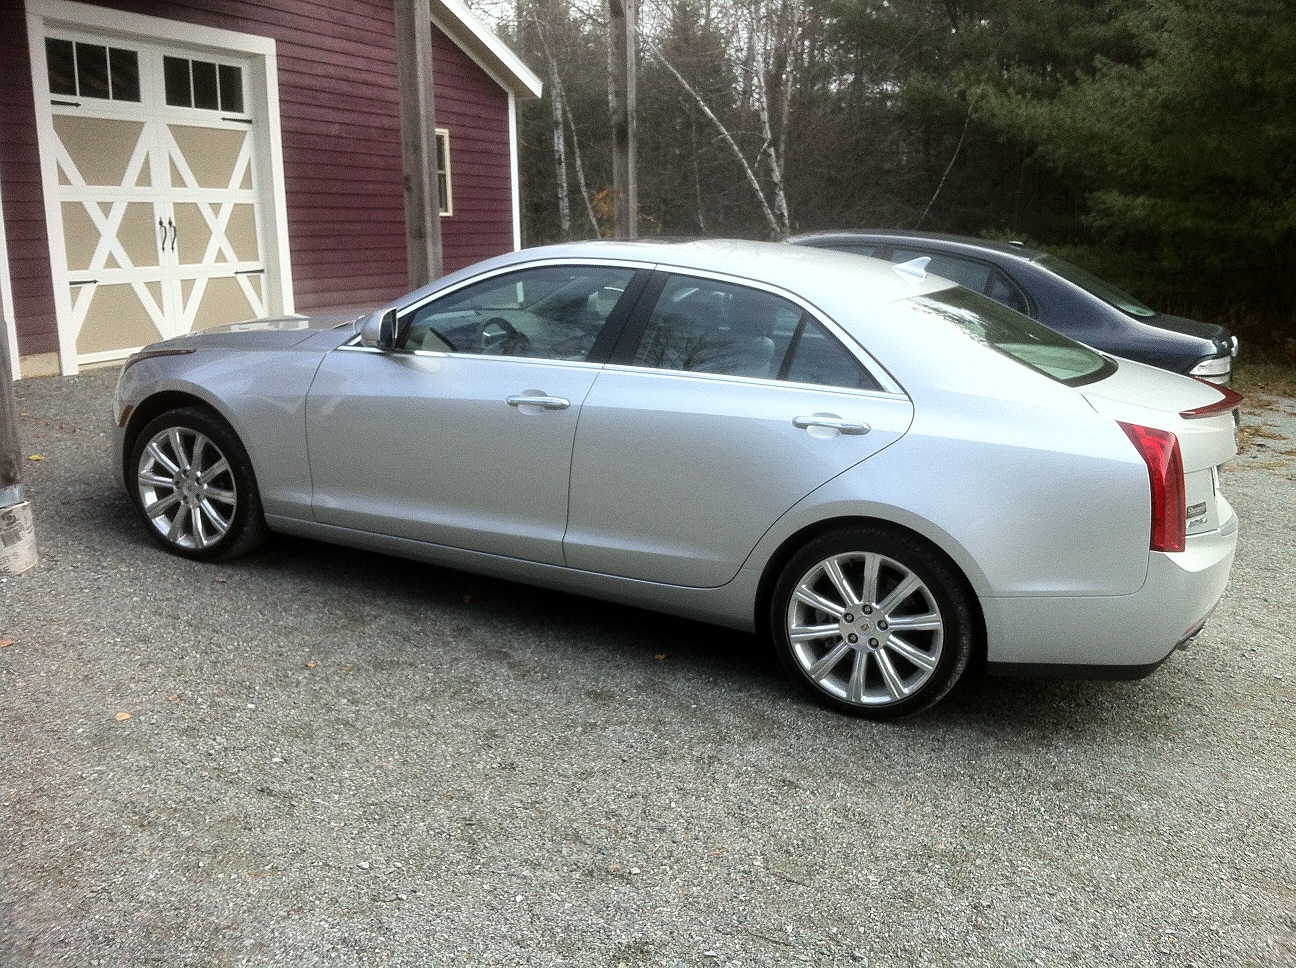 2013 Metallic Silver Cadillac ATS 2.0T AWD Automatic picture, mods, upgrades